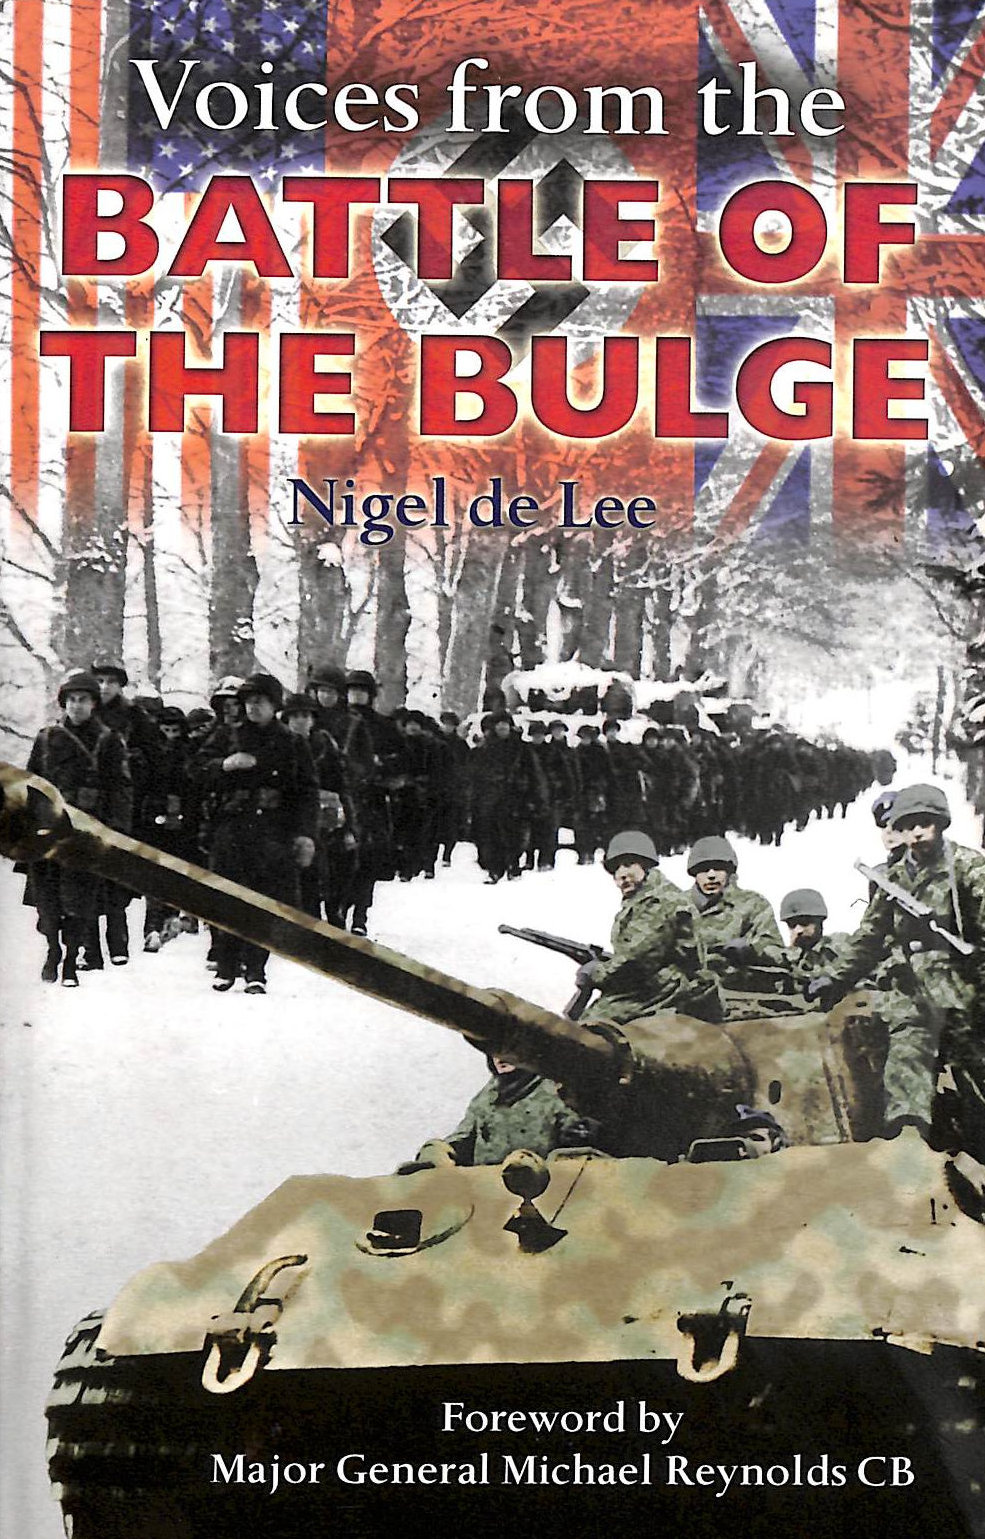 NIGEL DE LEE; MAJOR GENERAL MICHAEL REYNOLDS CB [FOREWORD] - Voices From The Battle Of The Bulge